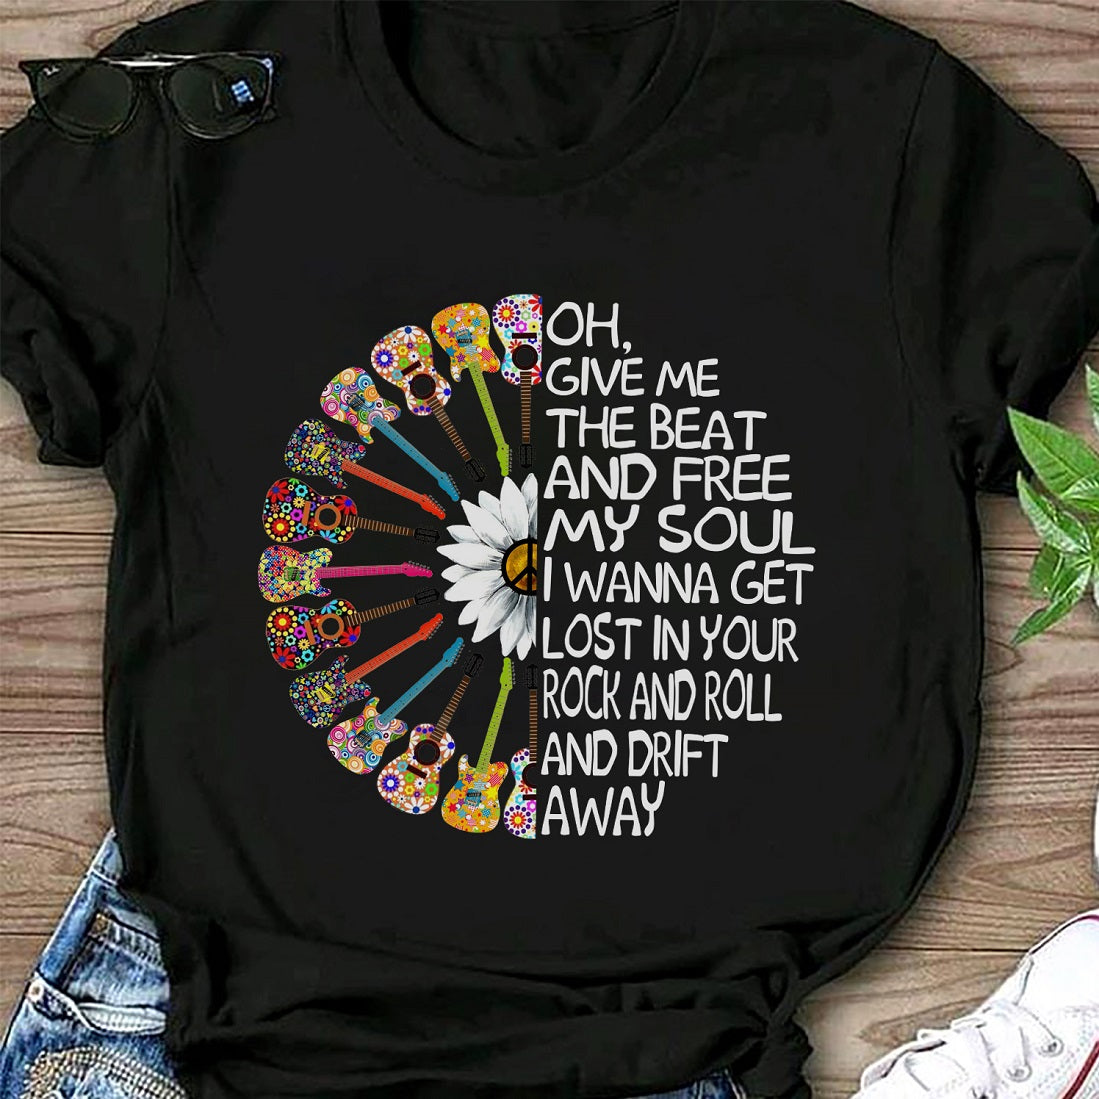 oh give me the beat and free my soul i wanna get lost in your rock and roll and drift away hippie t shirt, Hippie Gift Unisex Cotton T-Shirt, Gifts For Hippie Friends